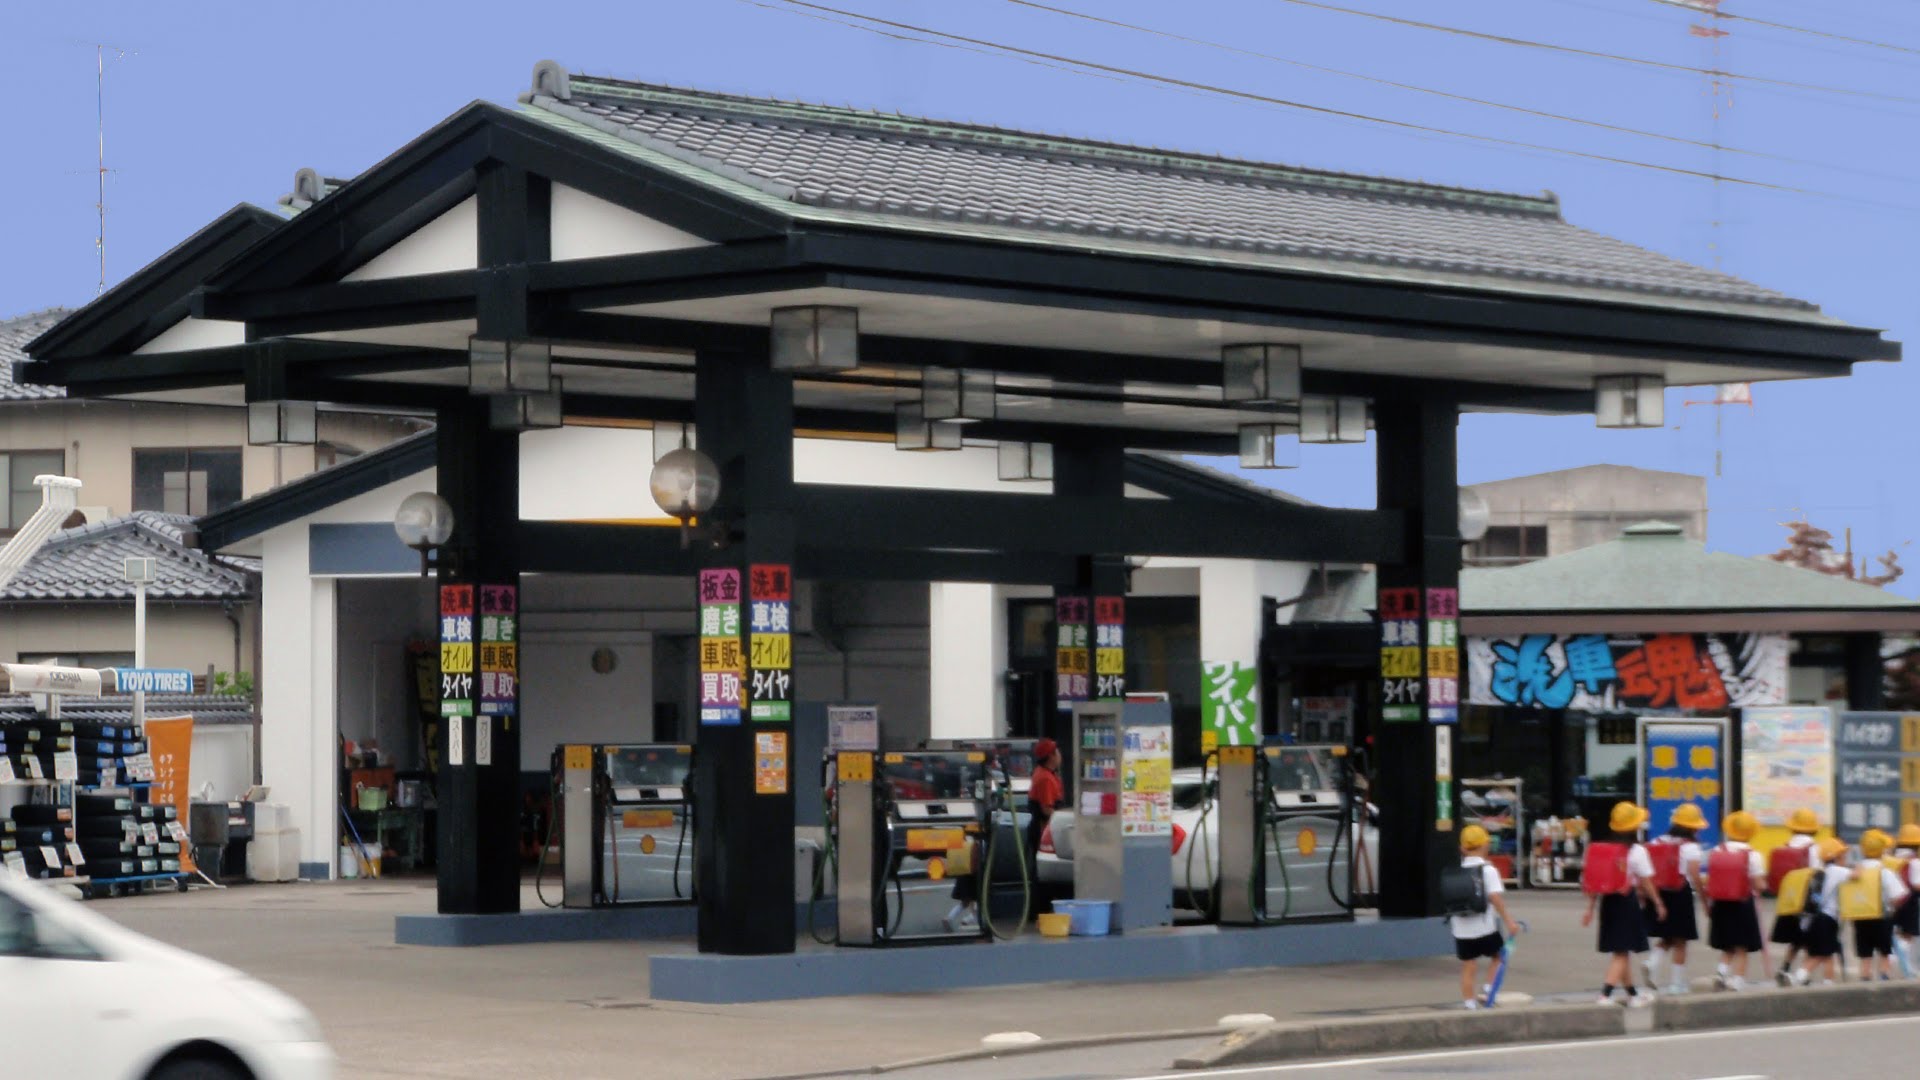 ☆ EXPERIENCING GAS STATIONS IN JAPAN ☆ - YouTube